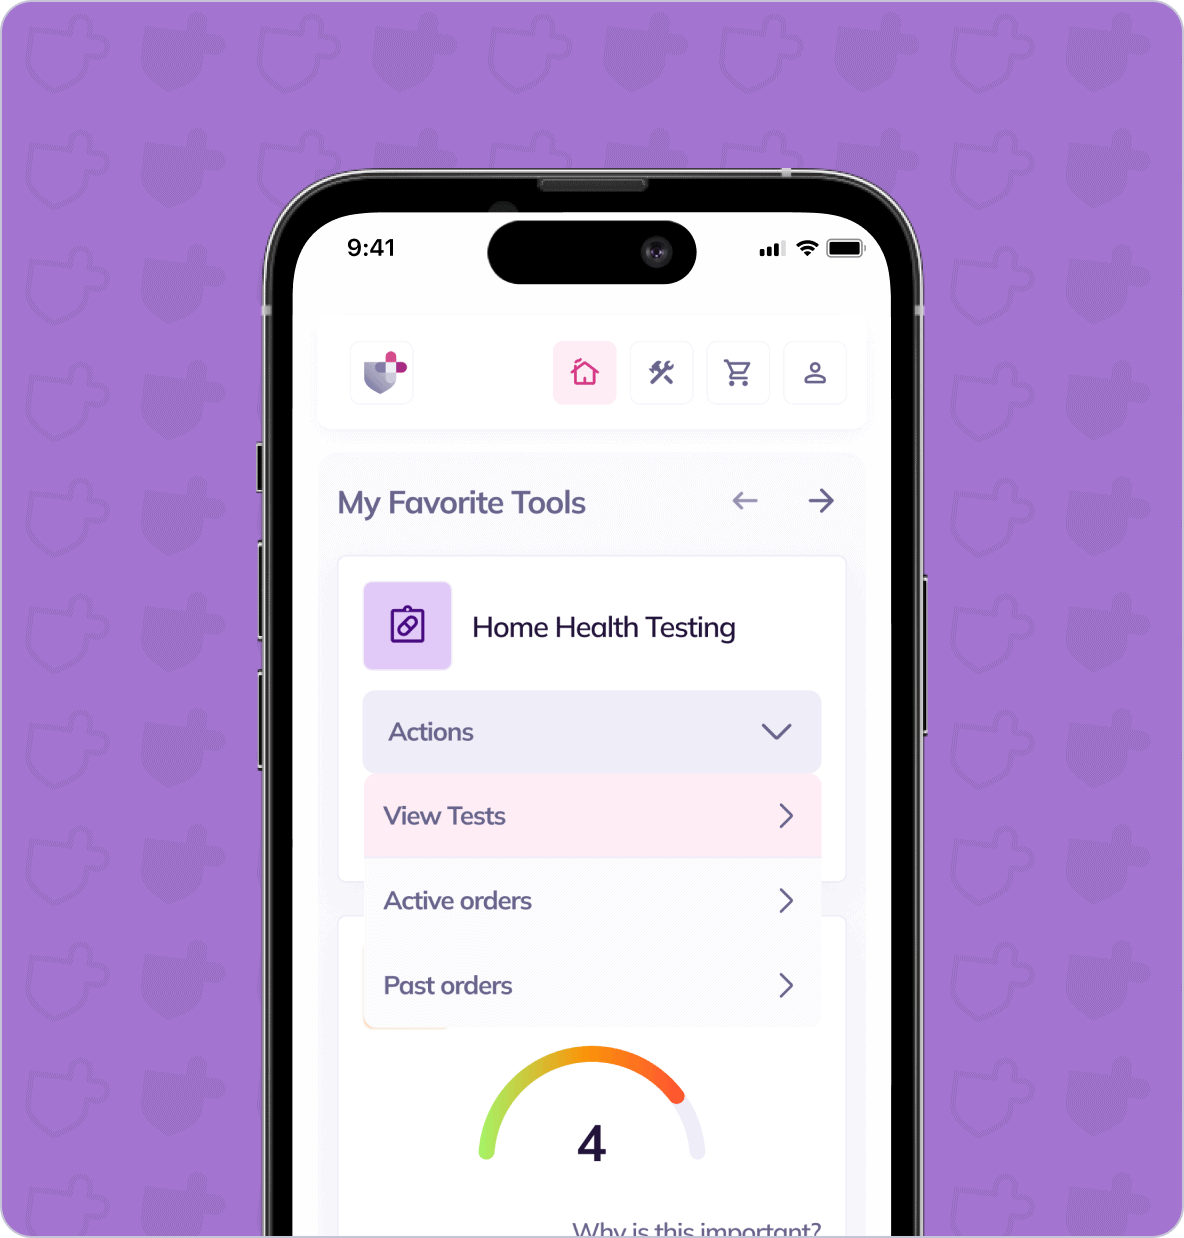 A smartphone screen displays a health app with options such as "Home Health Testing," "Active orders," "Past orders," and a highlighted "View Tests" section. Background features a purple pattern.